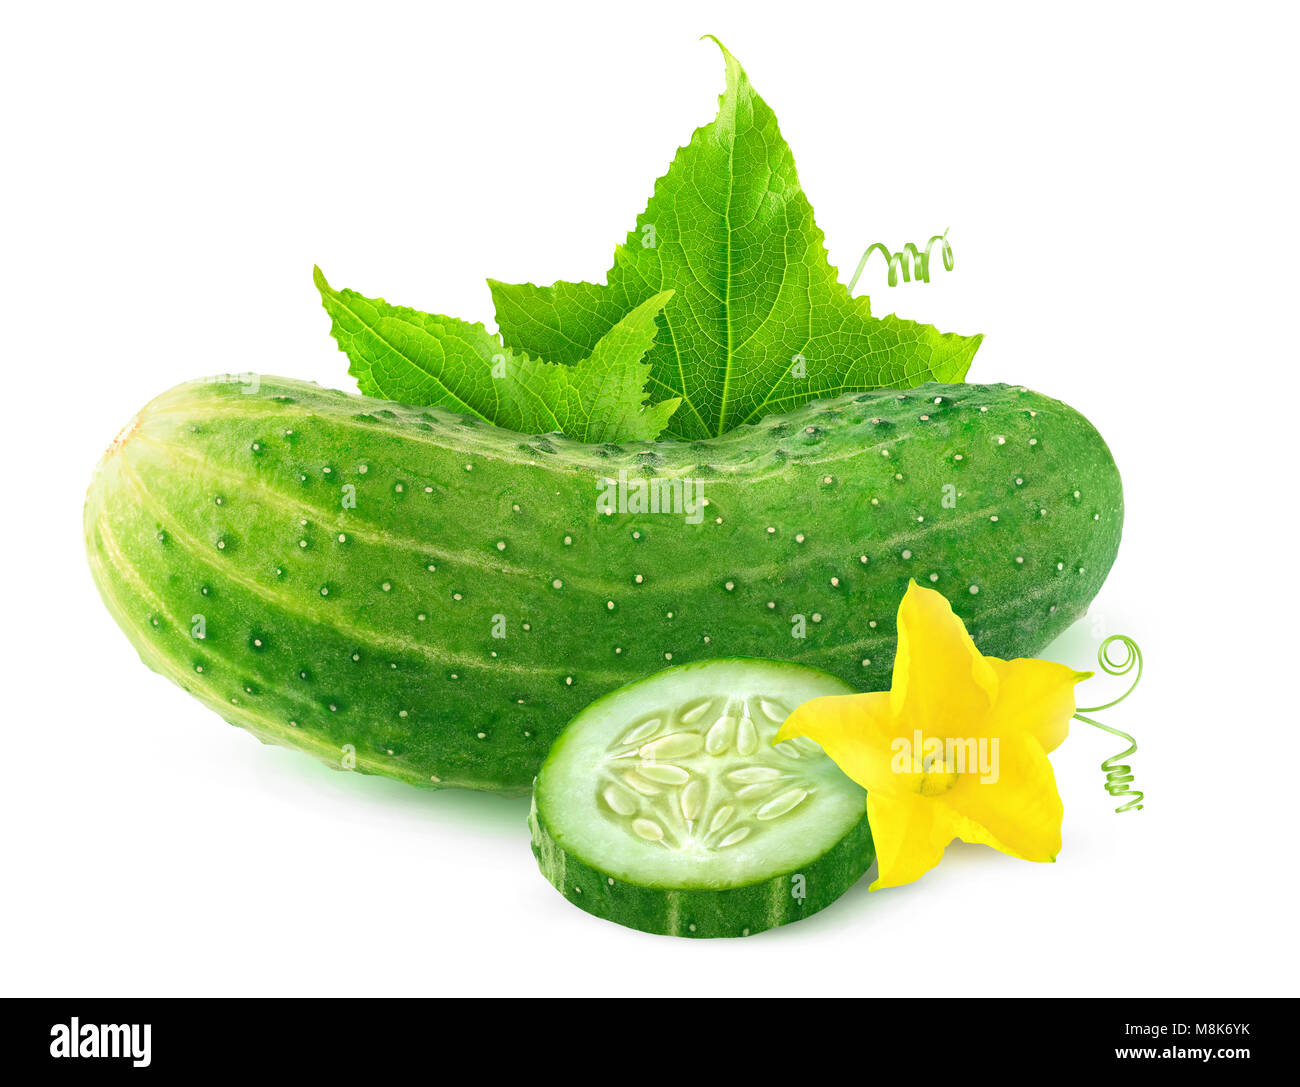 Isolated cucumber. One whole cucumber and a slice with flower and leaves isolated on white background with clipping path Stock Photo